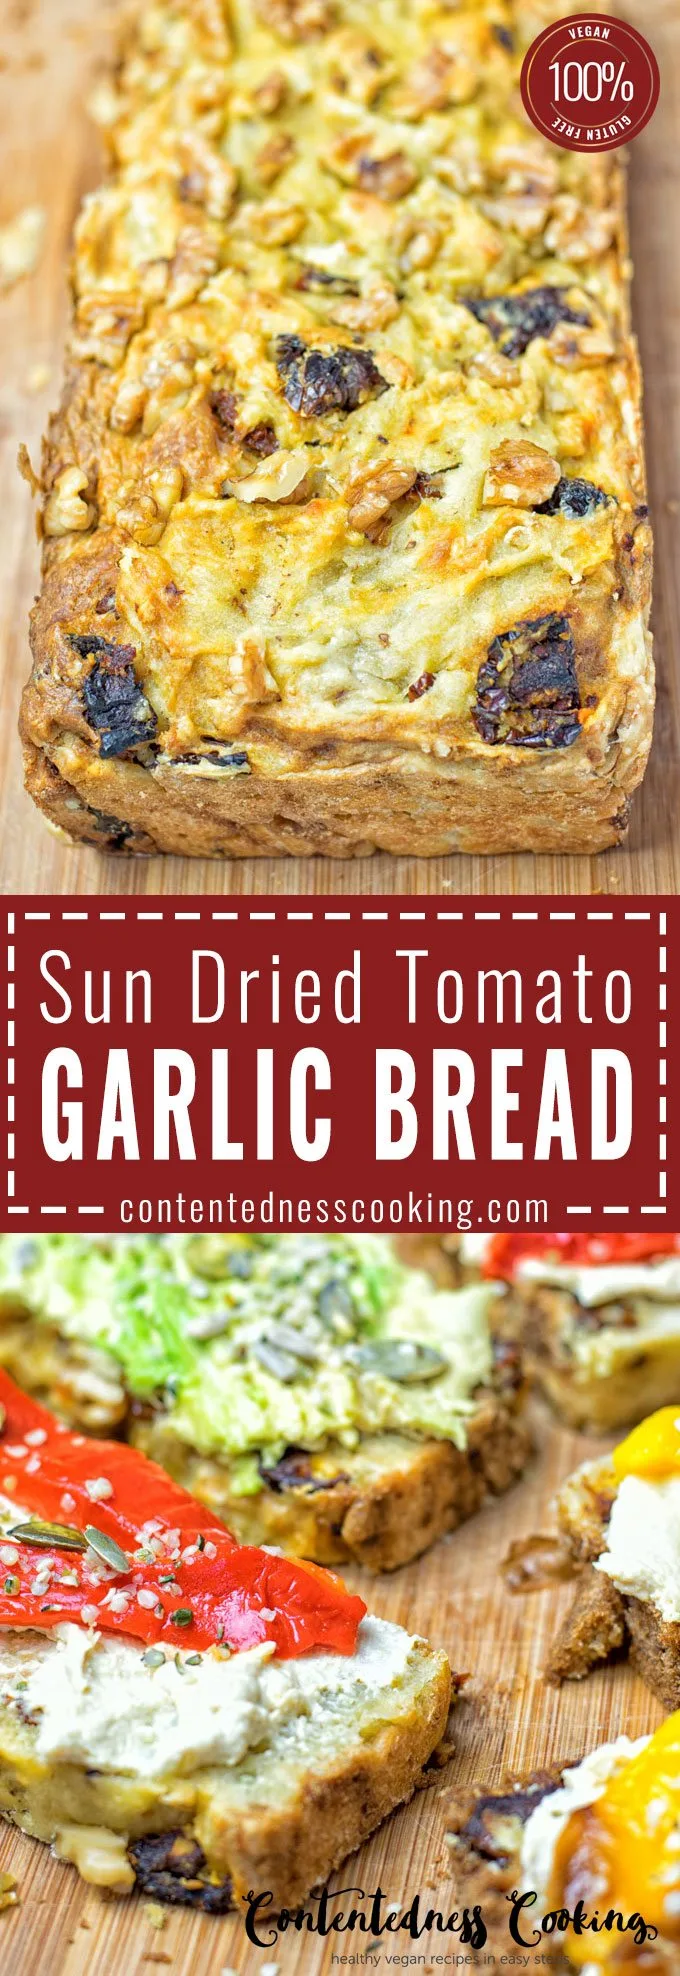 Collage of two pictures of the Sun Dried Tomato Garlic Bread with recipe title text.